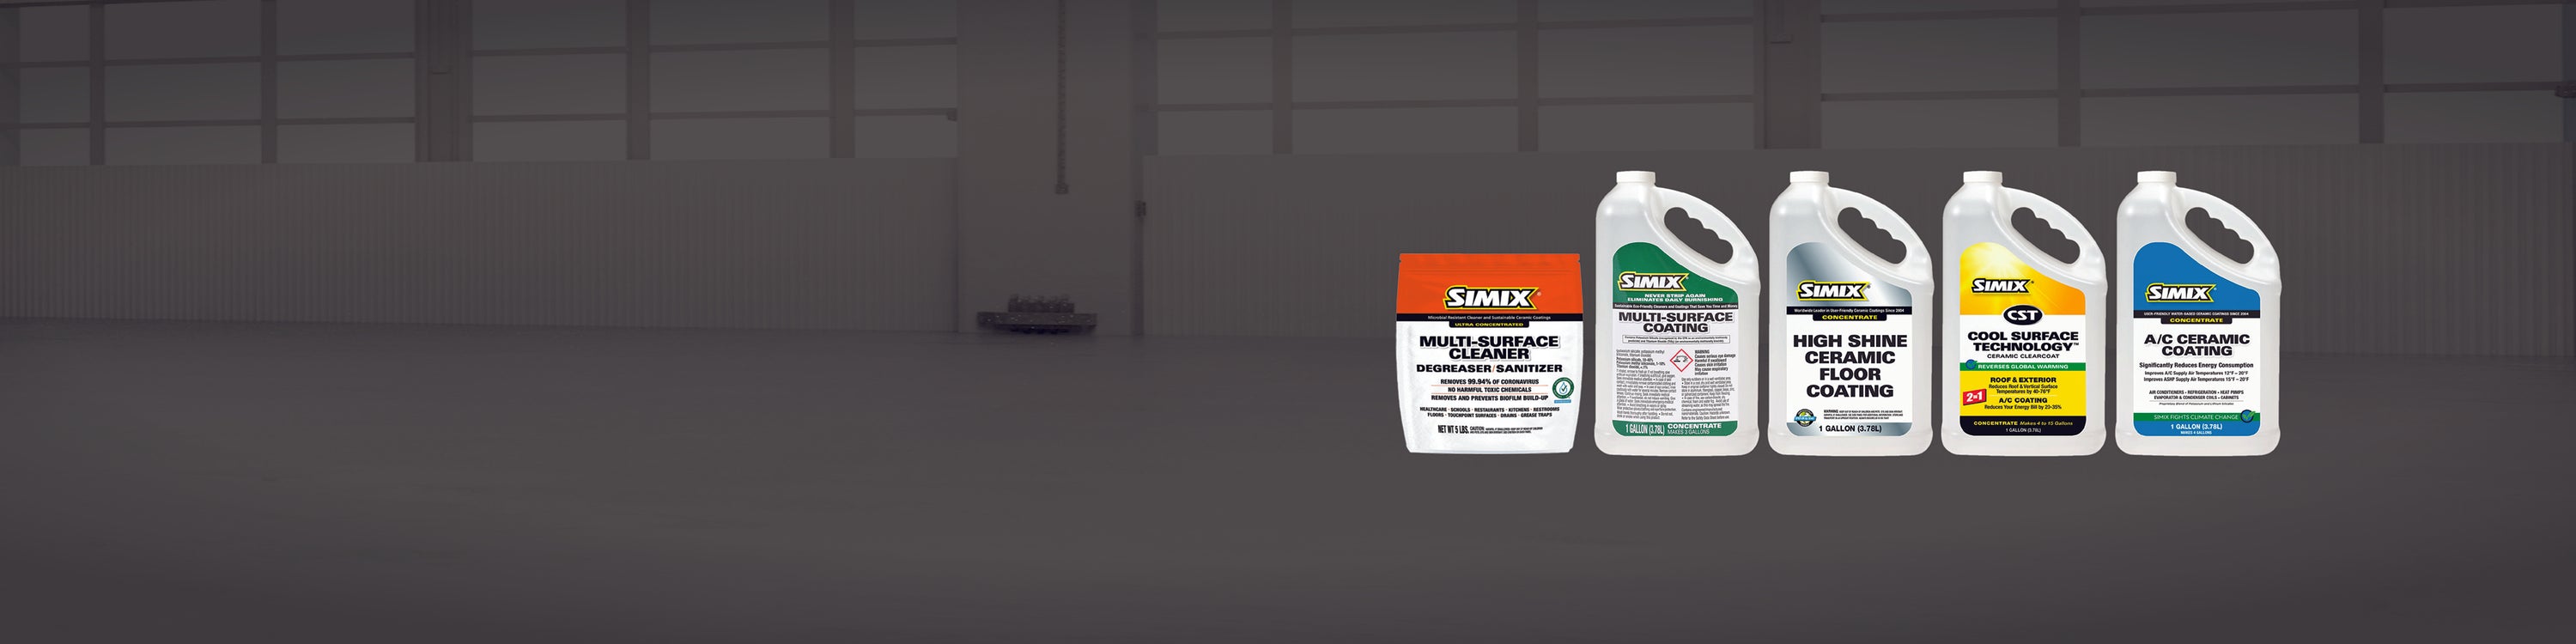 Simix Cleaners - Xtreme Polishing Systems